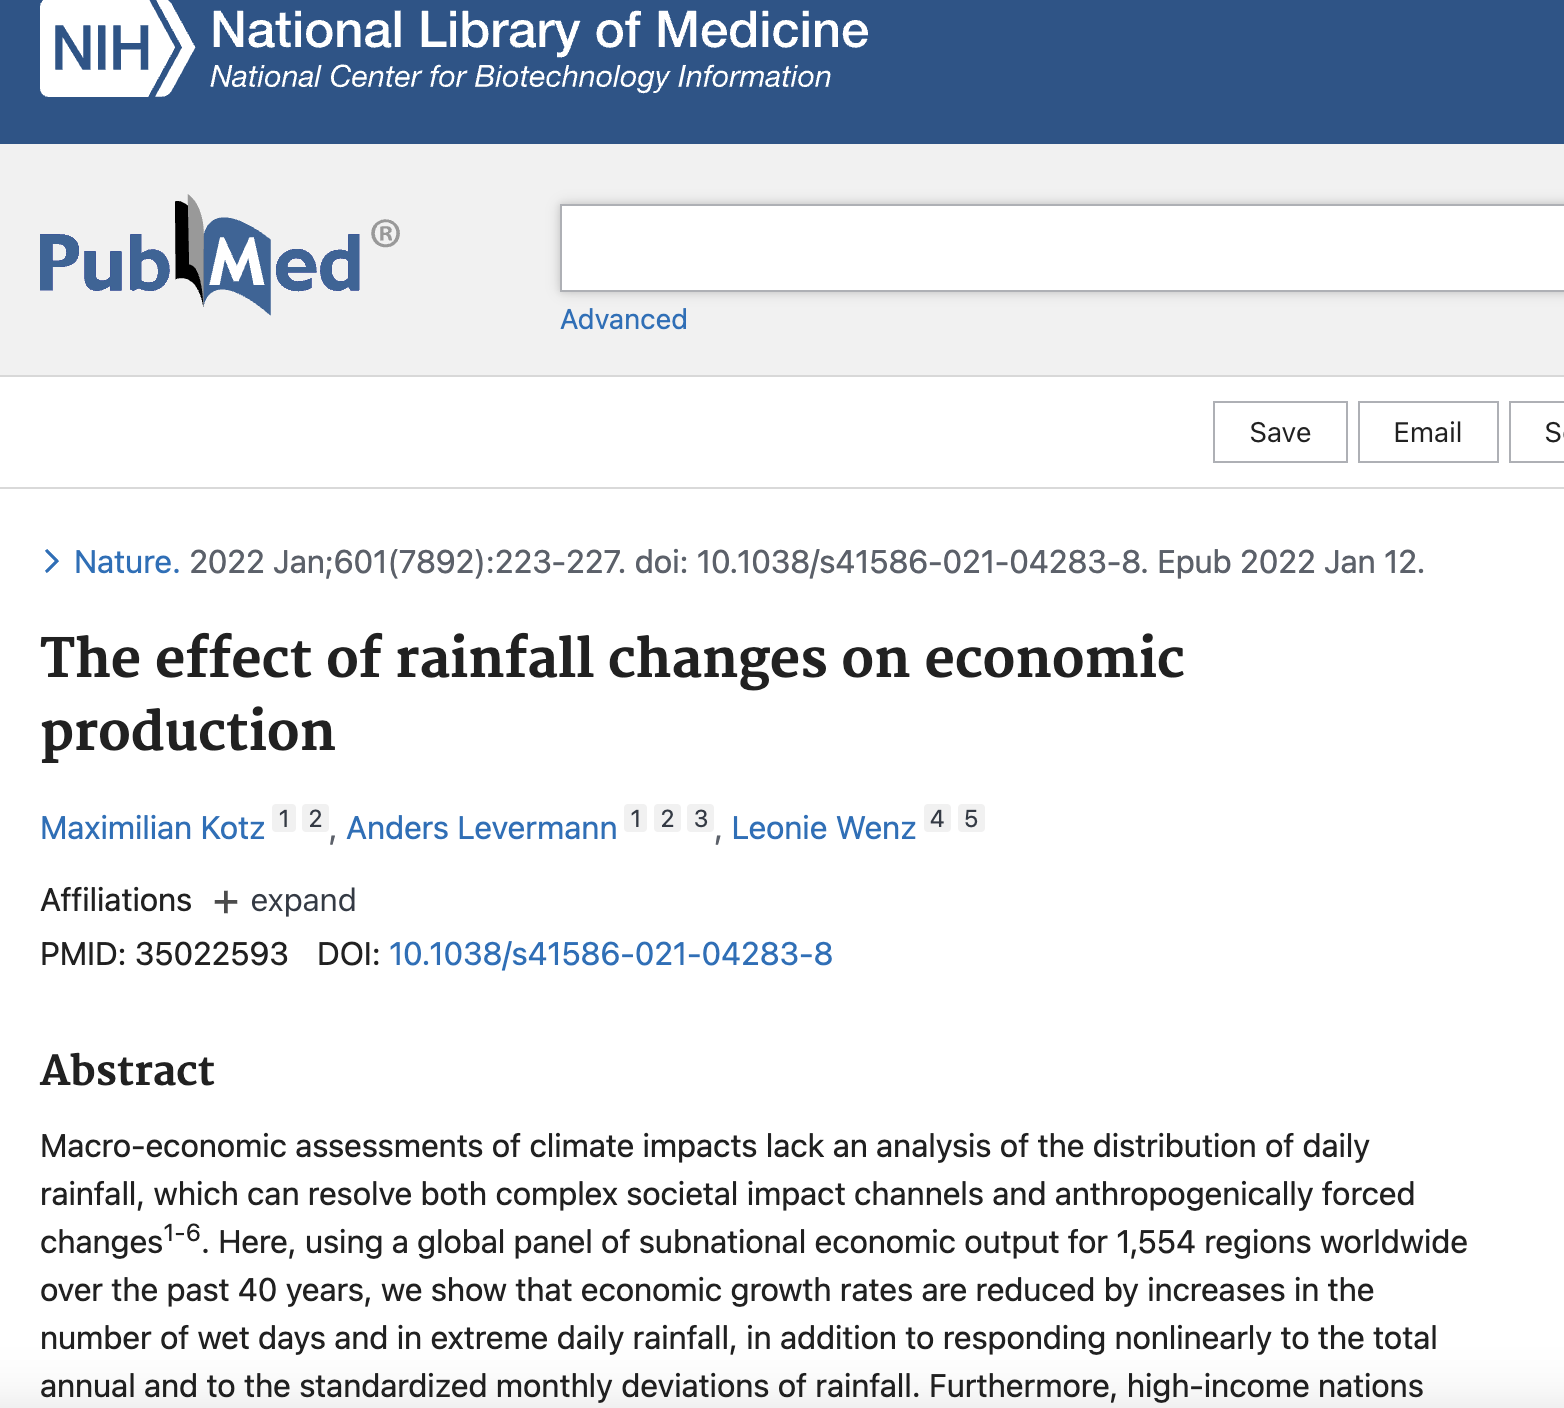 WP6 Global manufacturing chains- The effect of rainfall changes on economic production